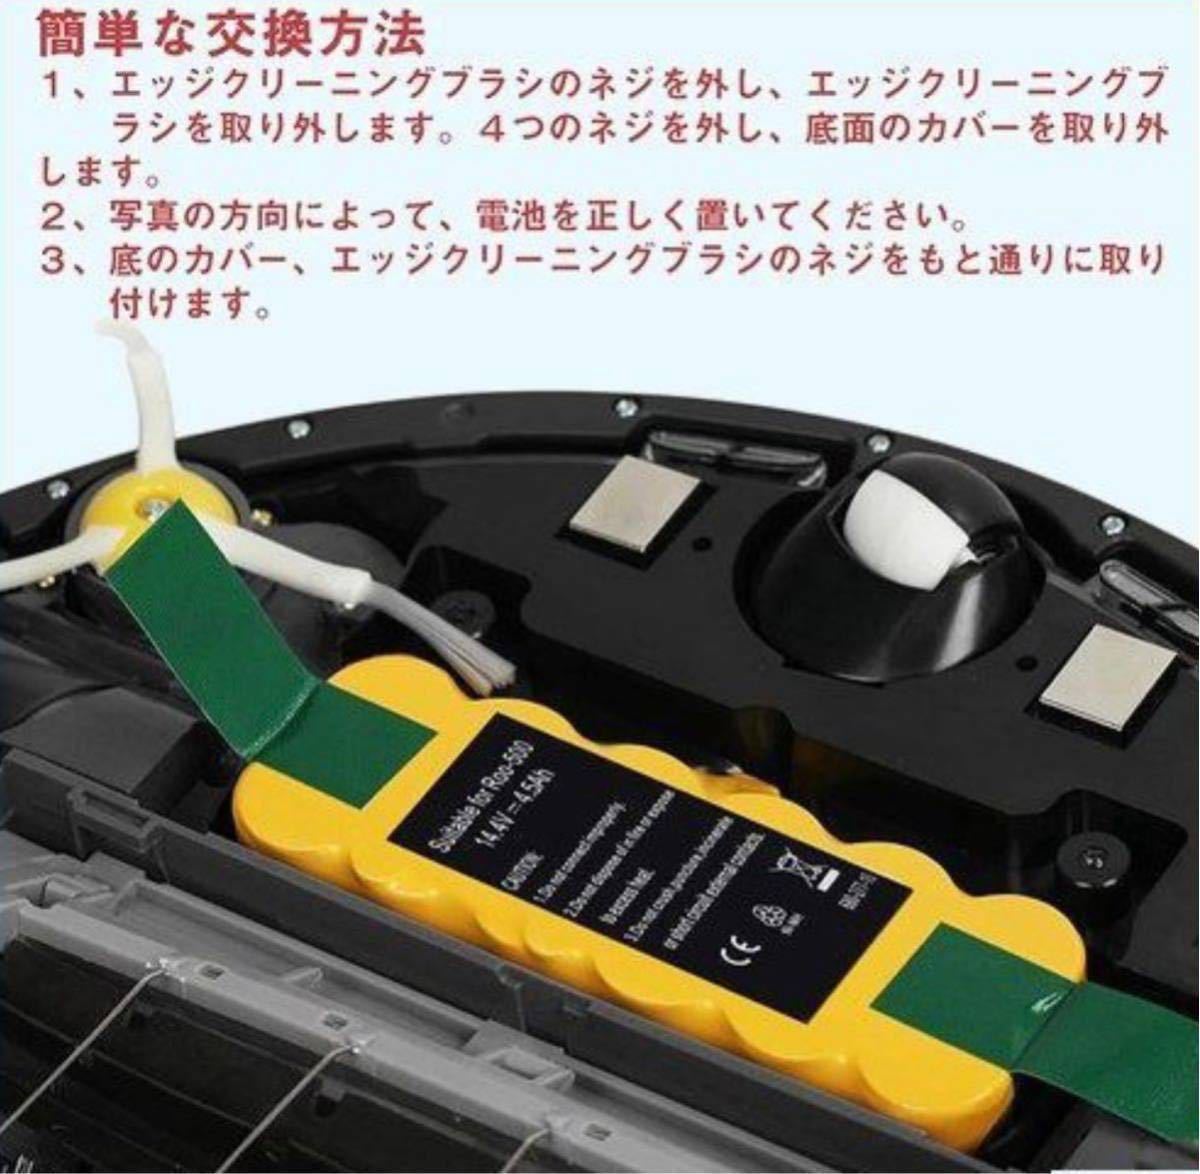  new goods * roomba /14.4v/ roomba battery / hour operation / vacuum cleaner battery / interchangeable battery 